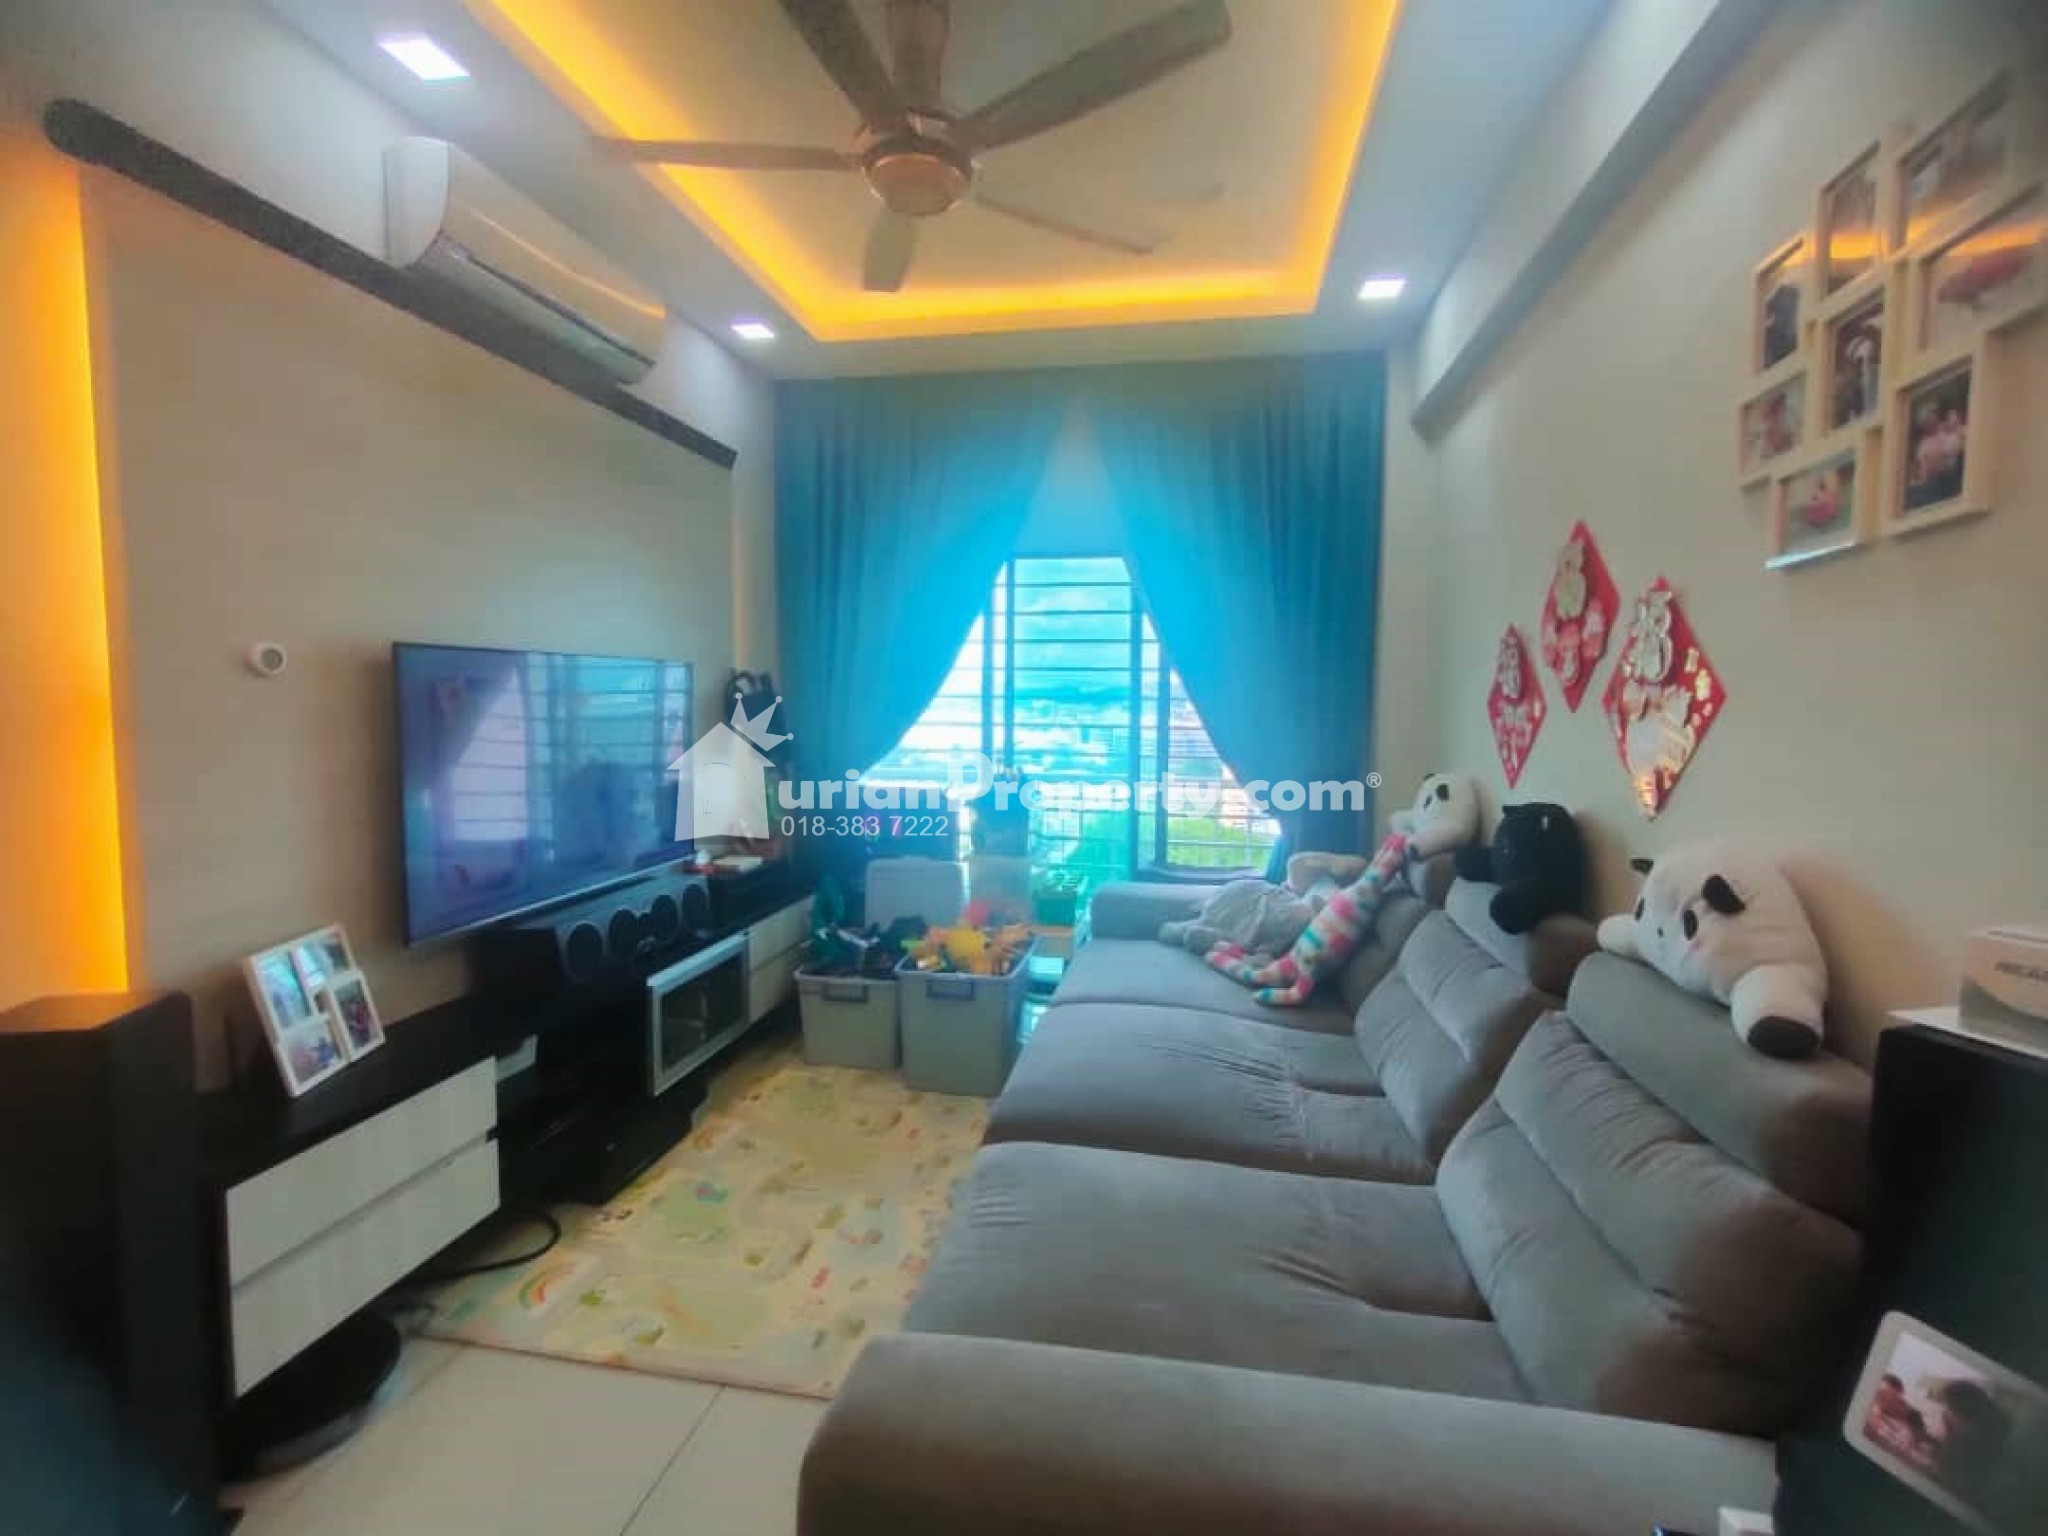 Condo For Sale at Park 51 Residency